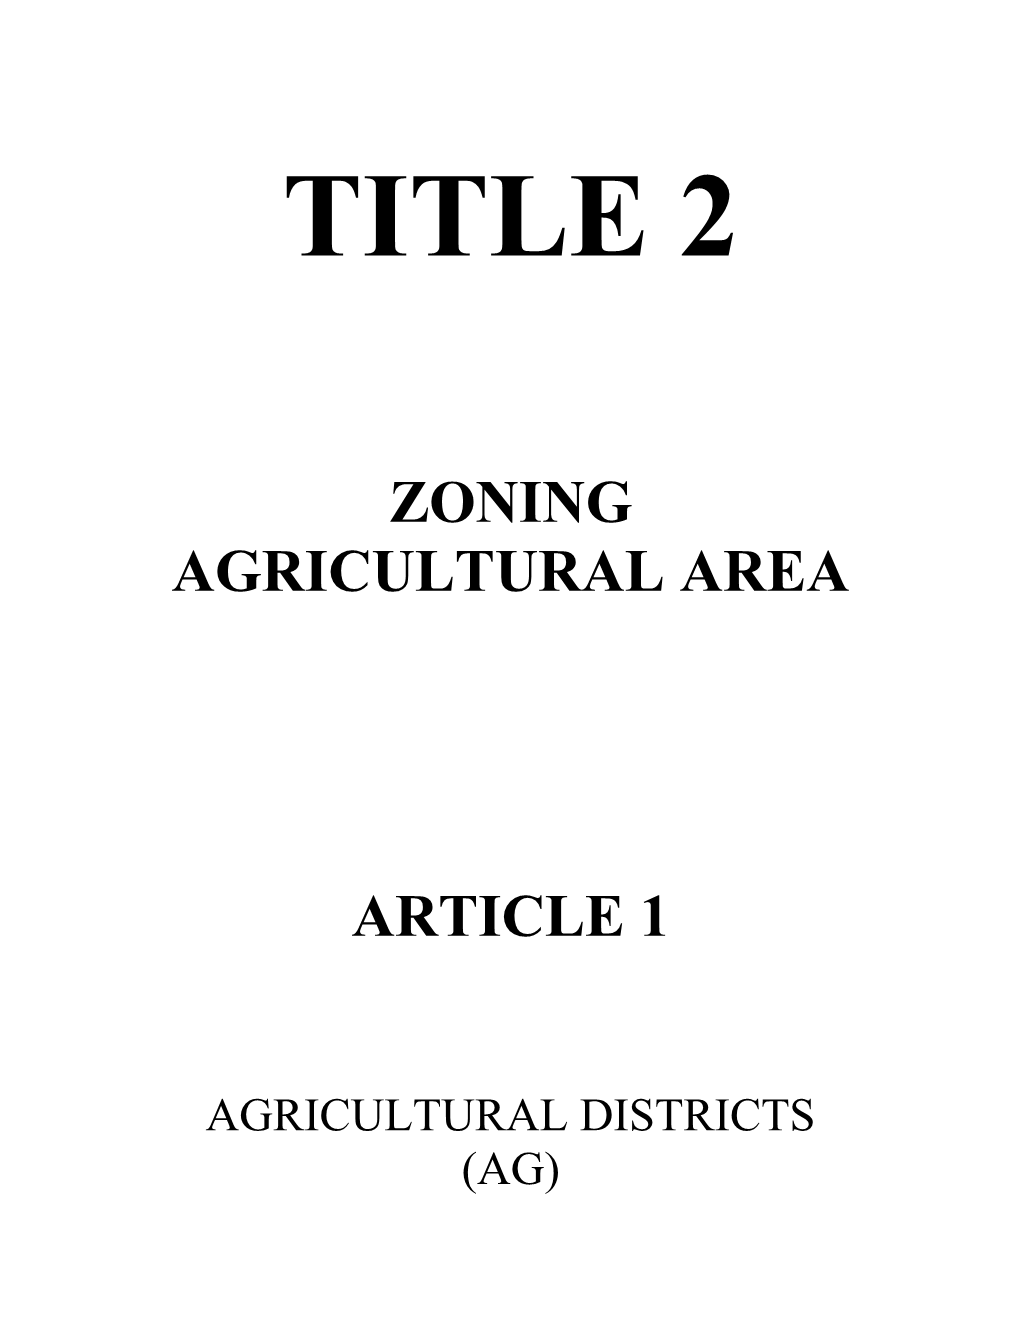 Zoning Agricultural Area